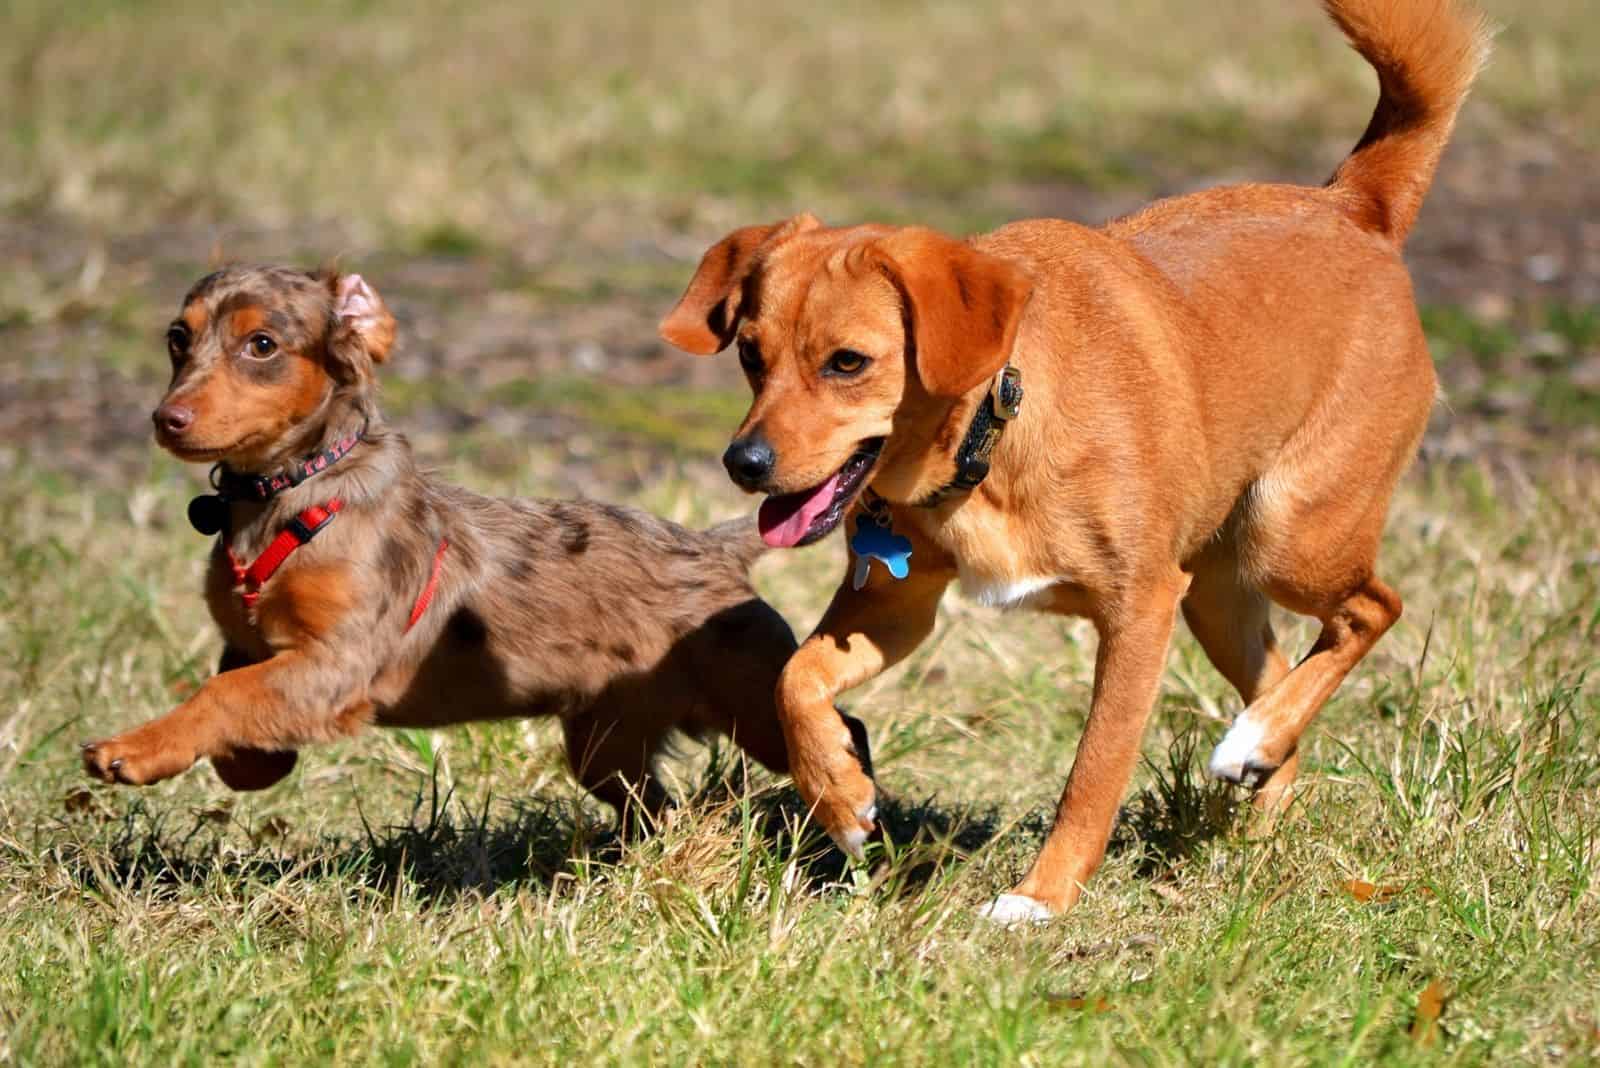 chihuahua dachshund mix breed running with a red hound